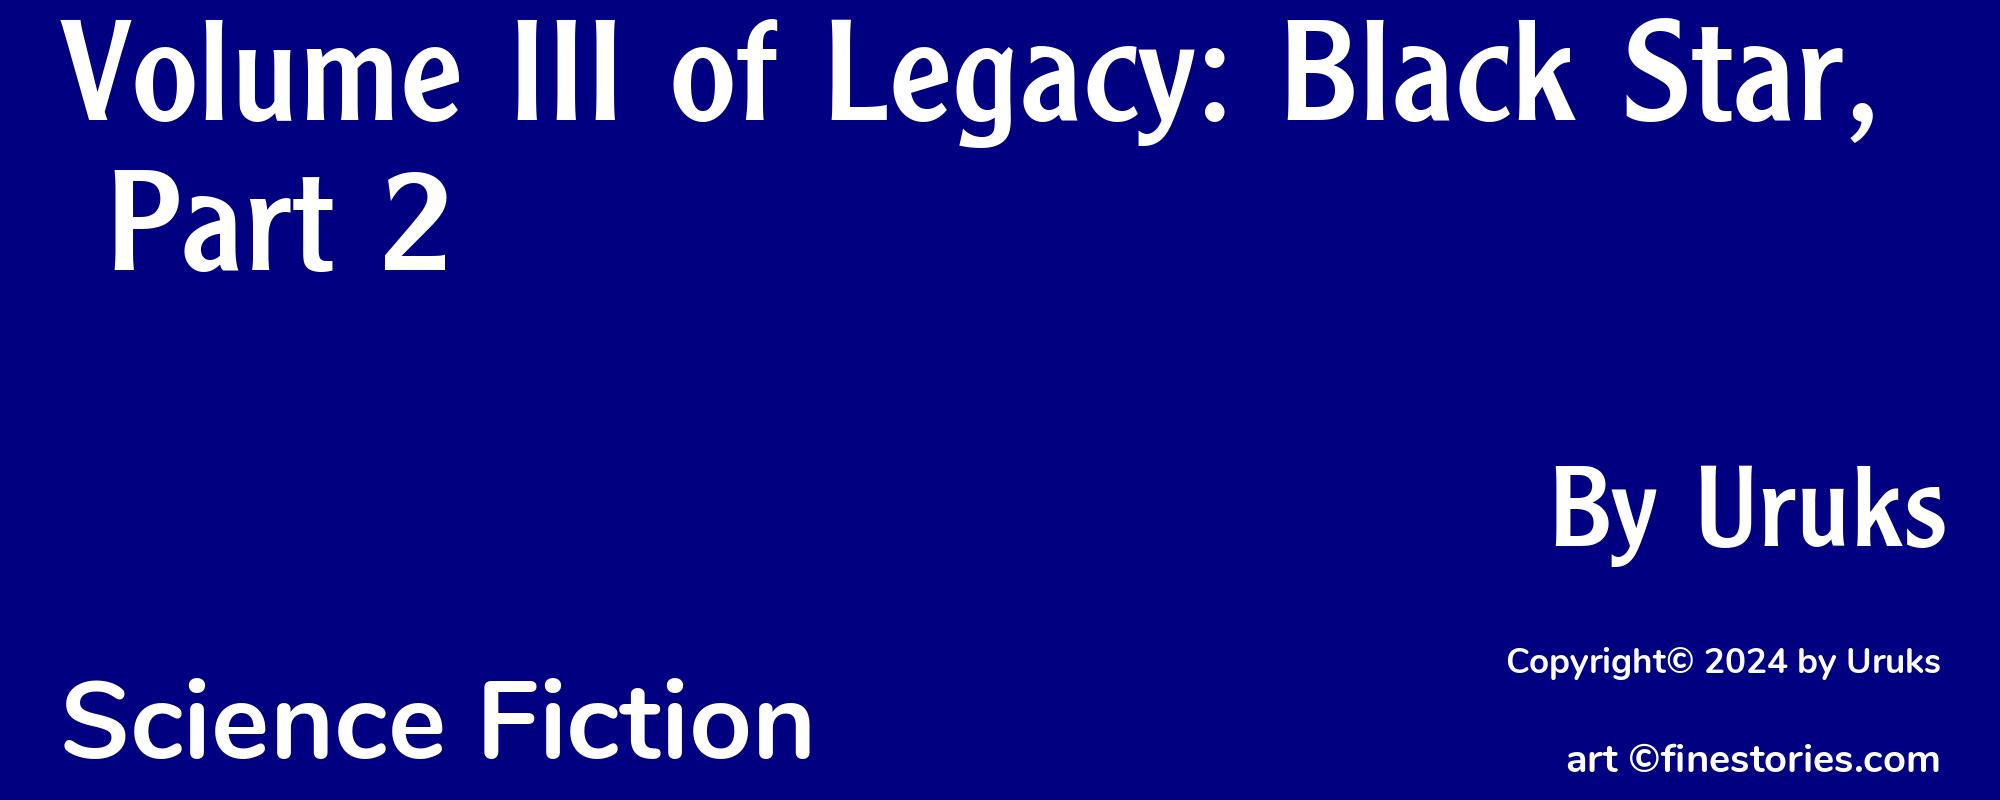 Volume III of Legacy: Black Star, Part 2 - Cover